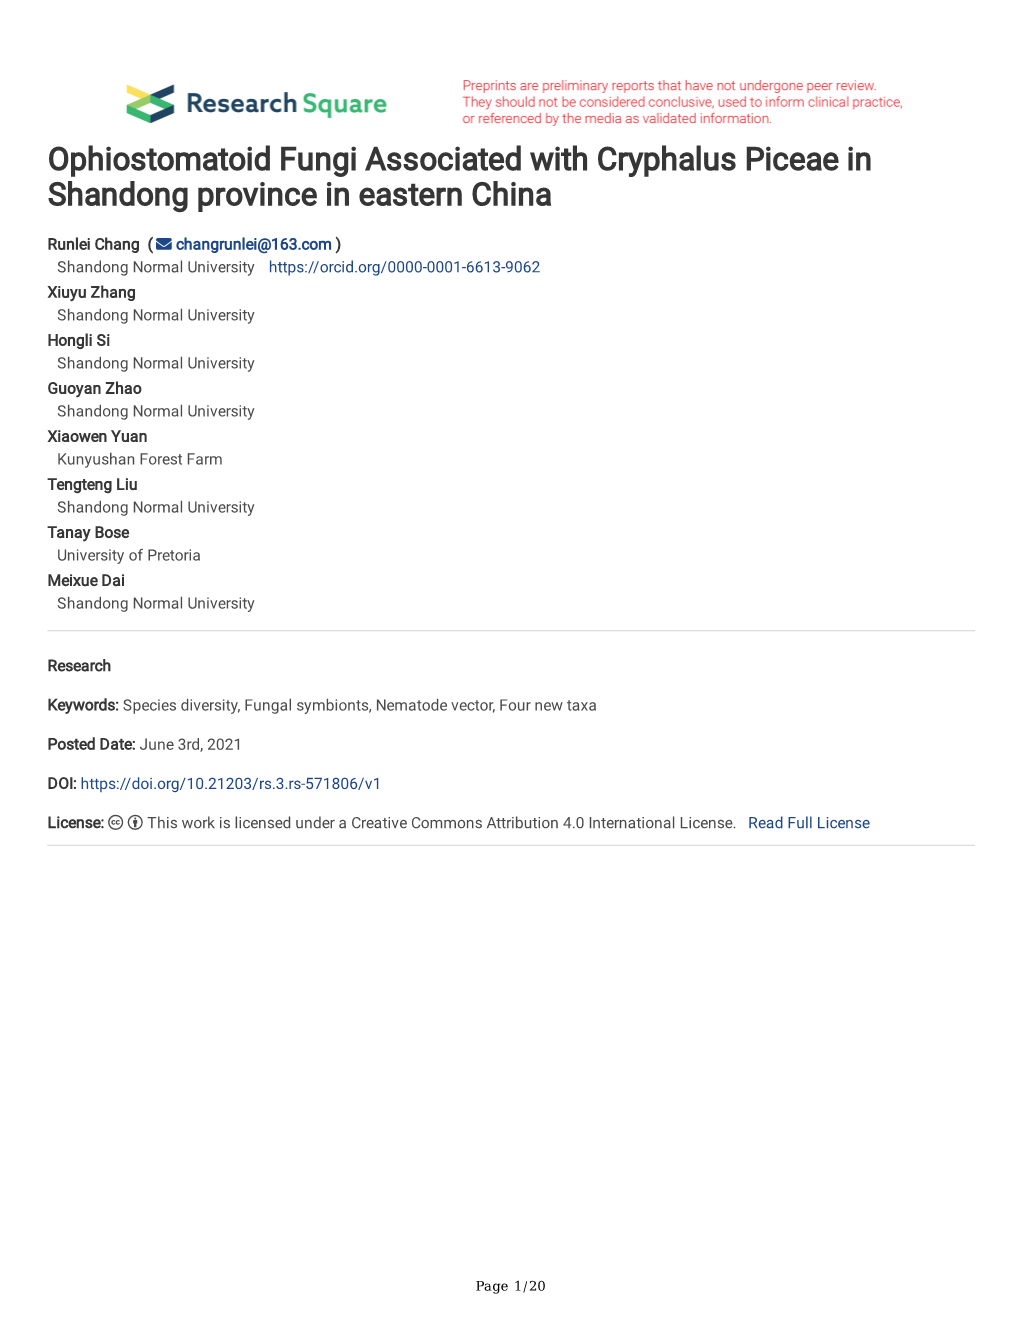 Ophiostomatoid Fungi Associated with Cryphalus Piceae in Shandong Province in Eastern China